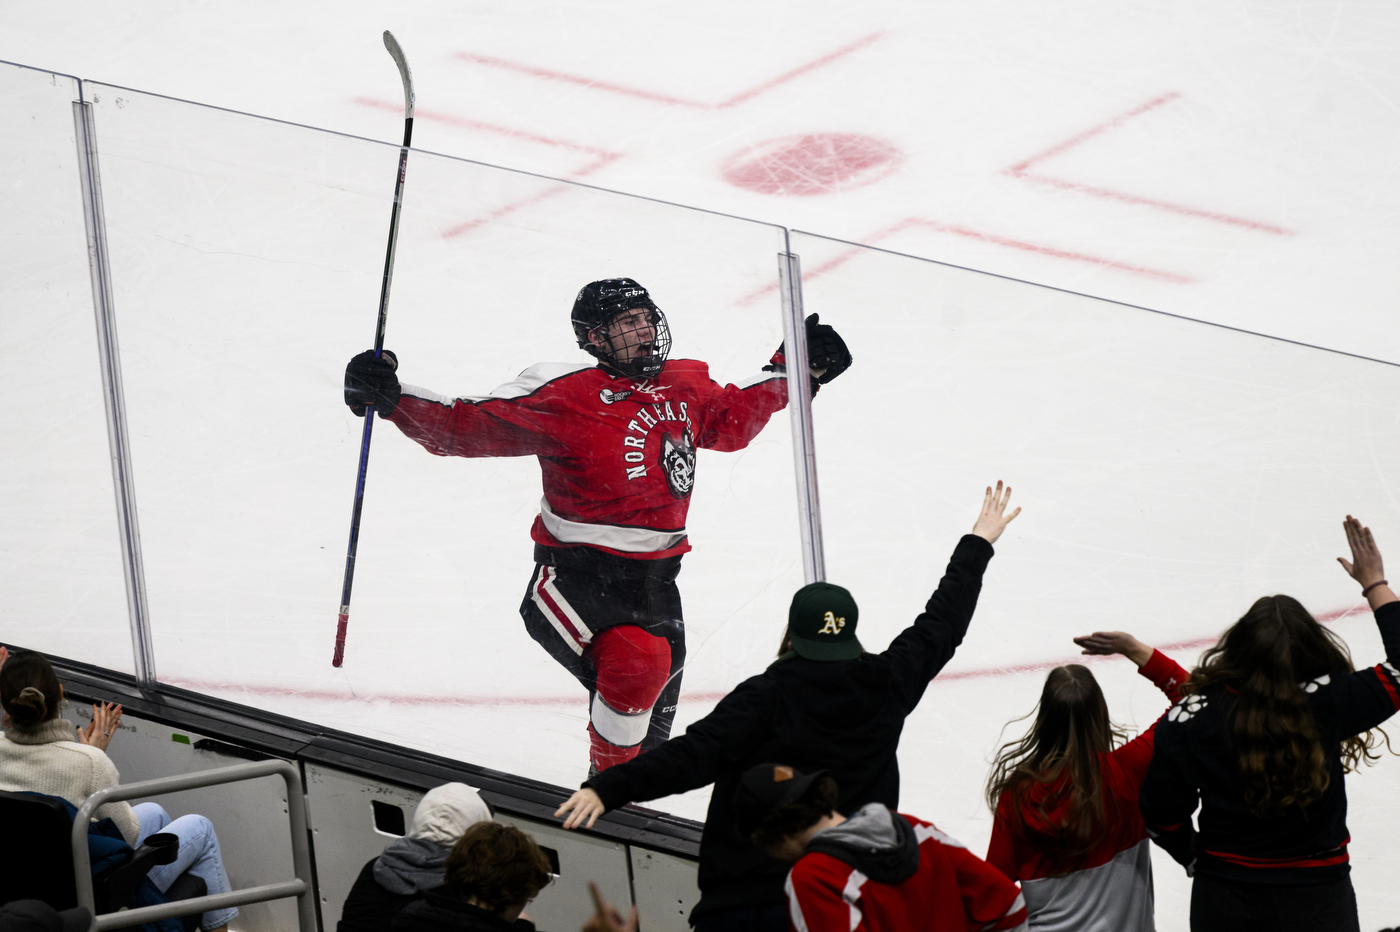 northeastern hockey player skating with arms up in celebration